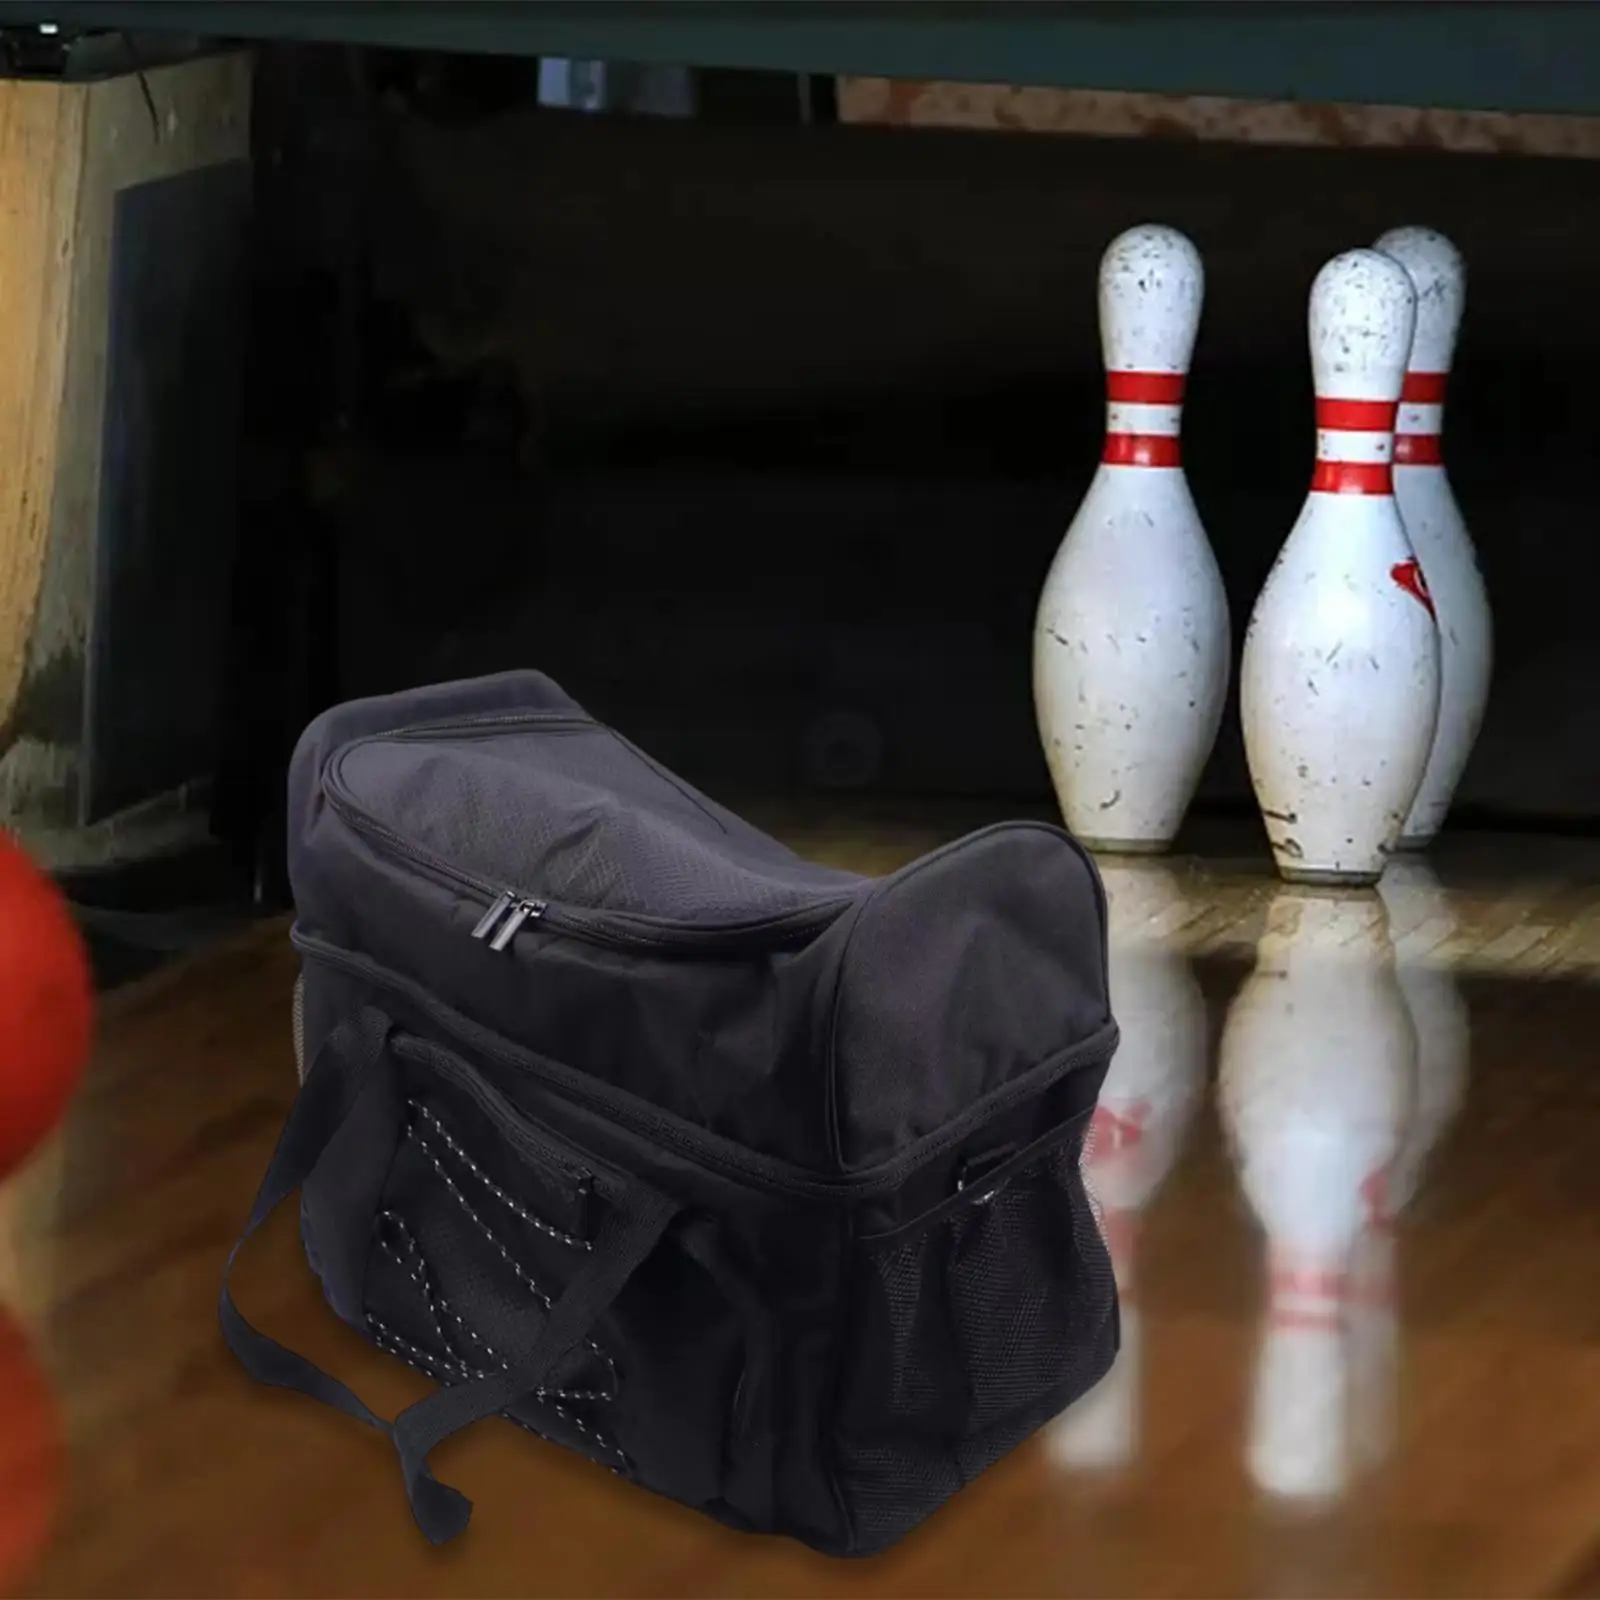 Bowling Bag for Double Balls Carrying Case Protector Bowling Ball Tote Fits Bowling Shoes up to Mens Size 16 Bowling Accessory